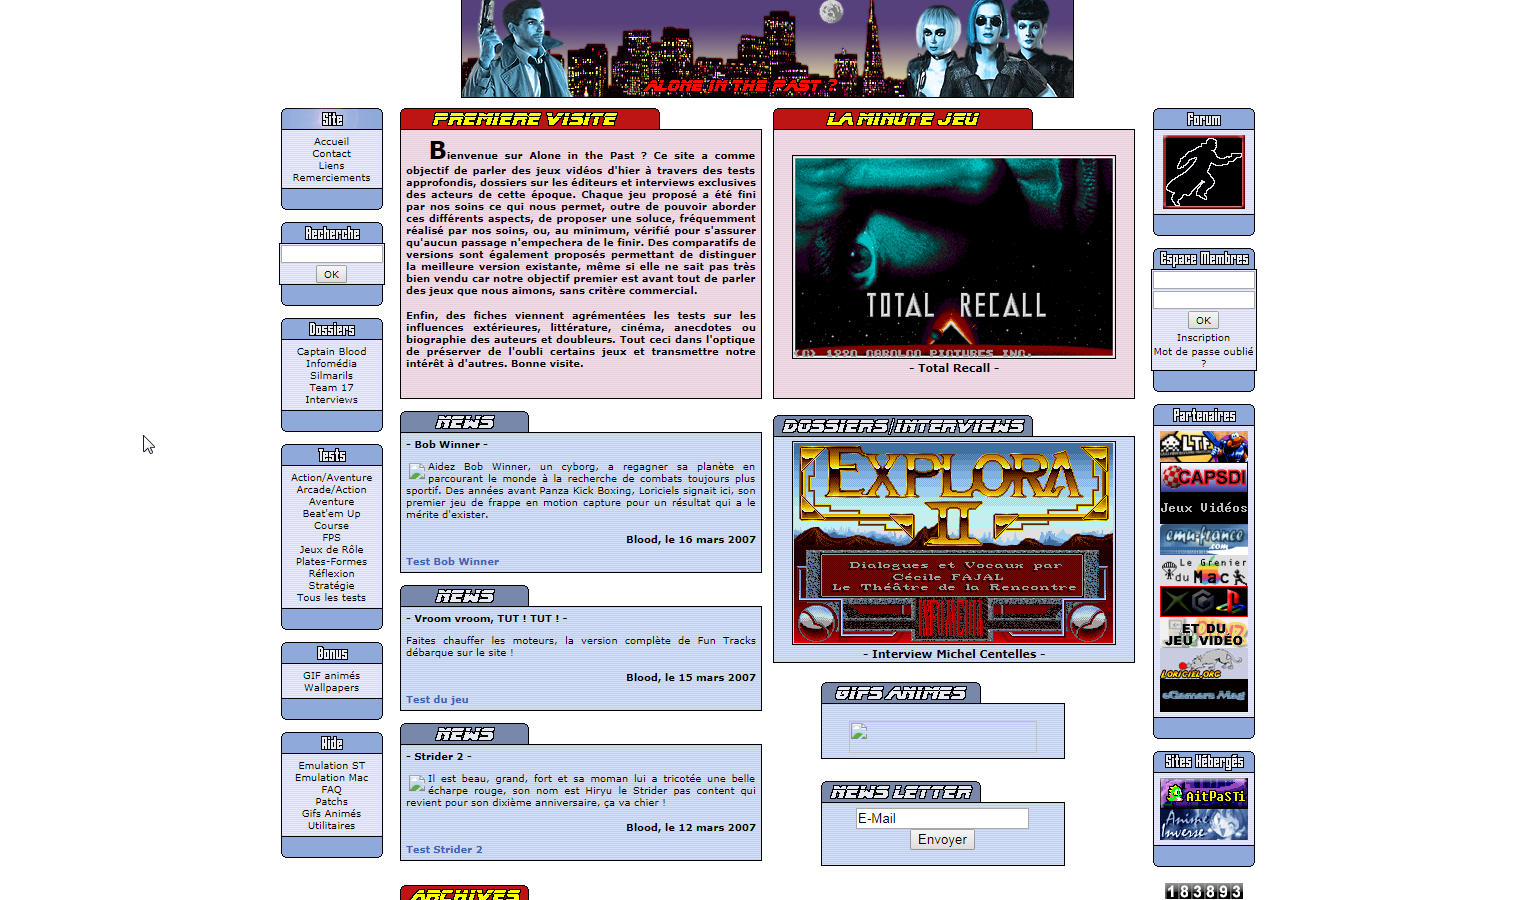 Screenshot of website Alone in the Past